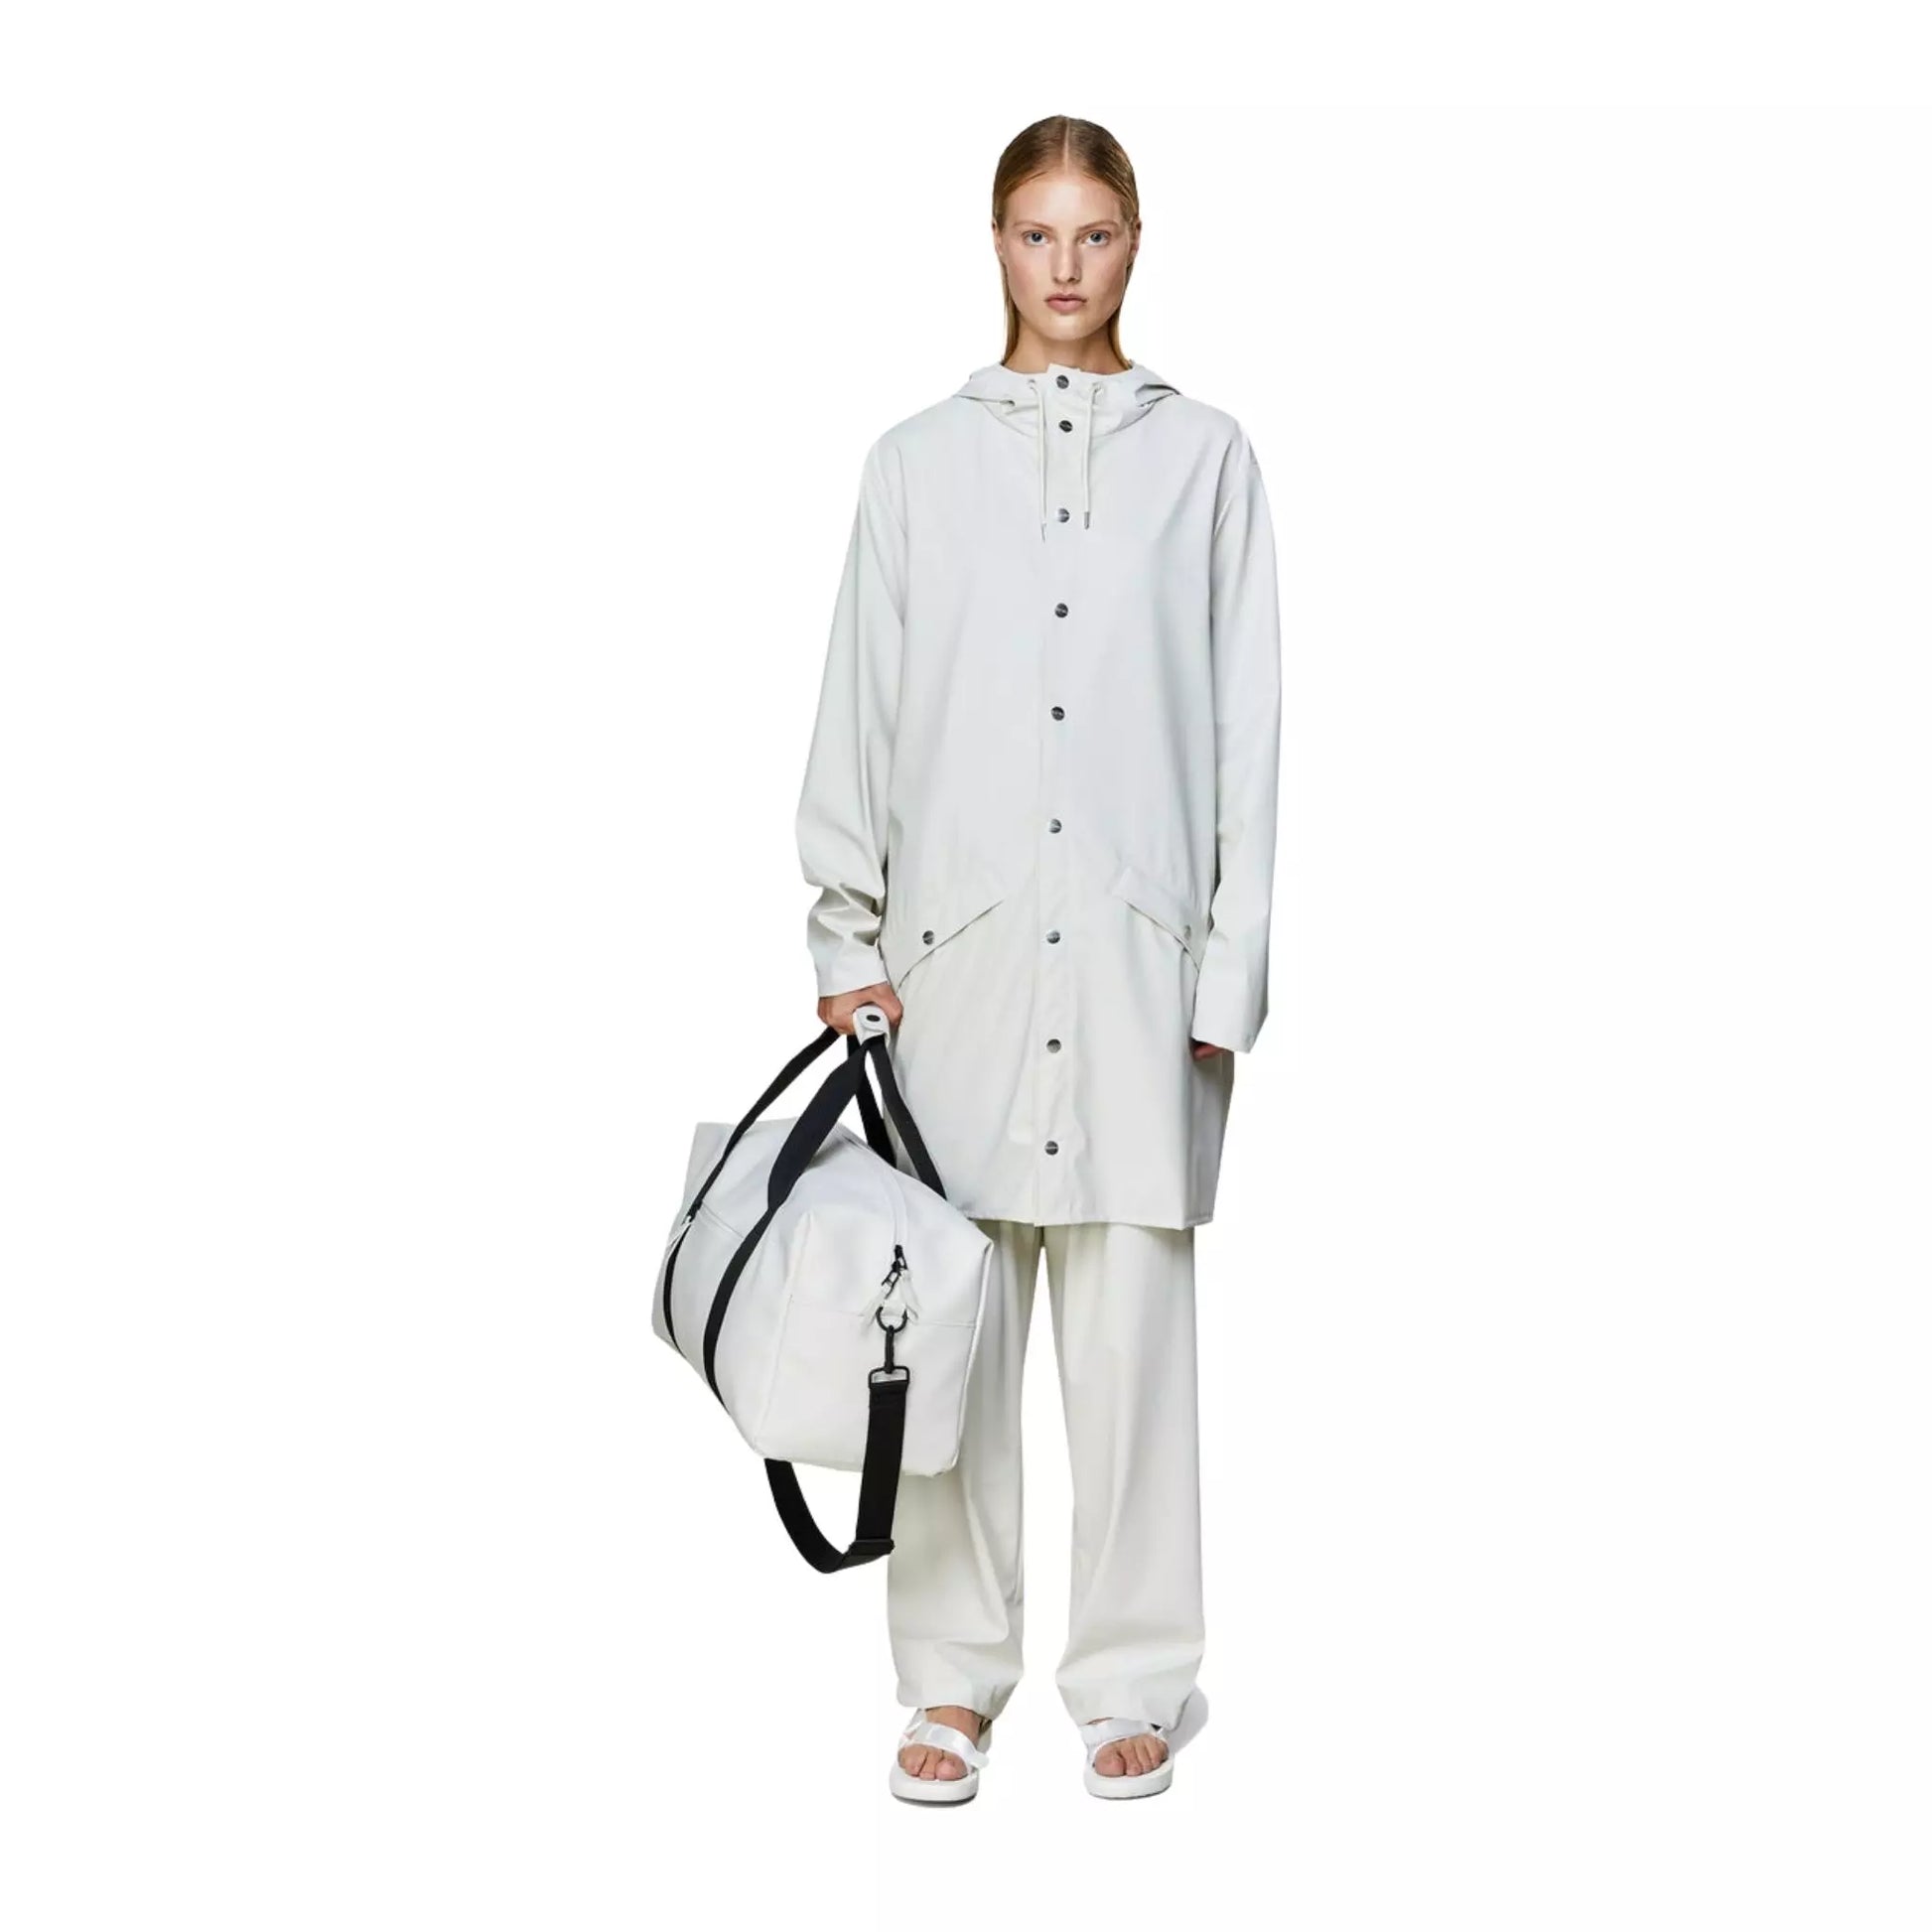 Rains waterproof gym bag off white held by one hand of a woman on the side